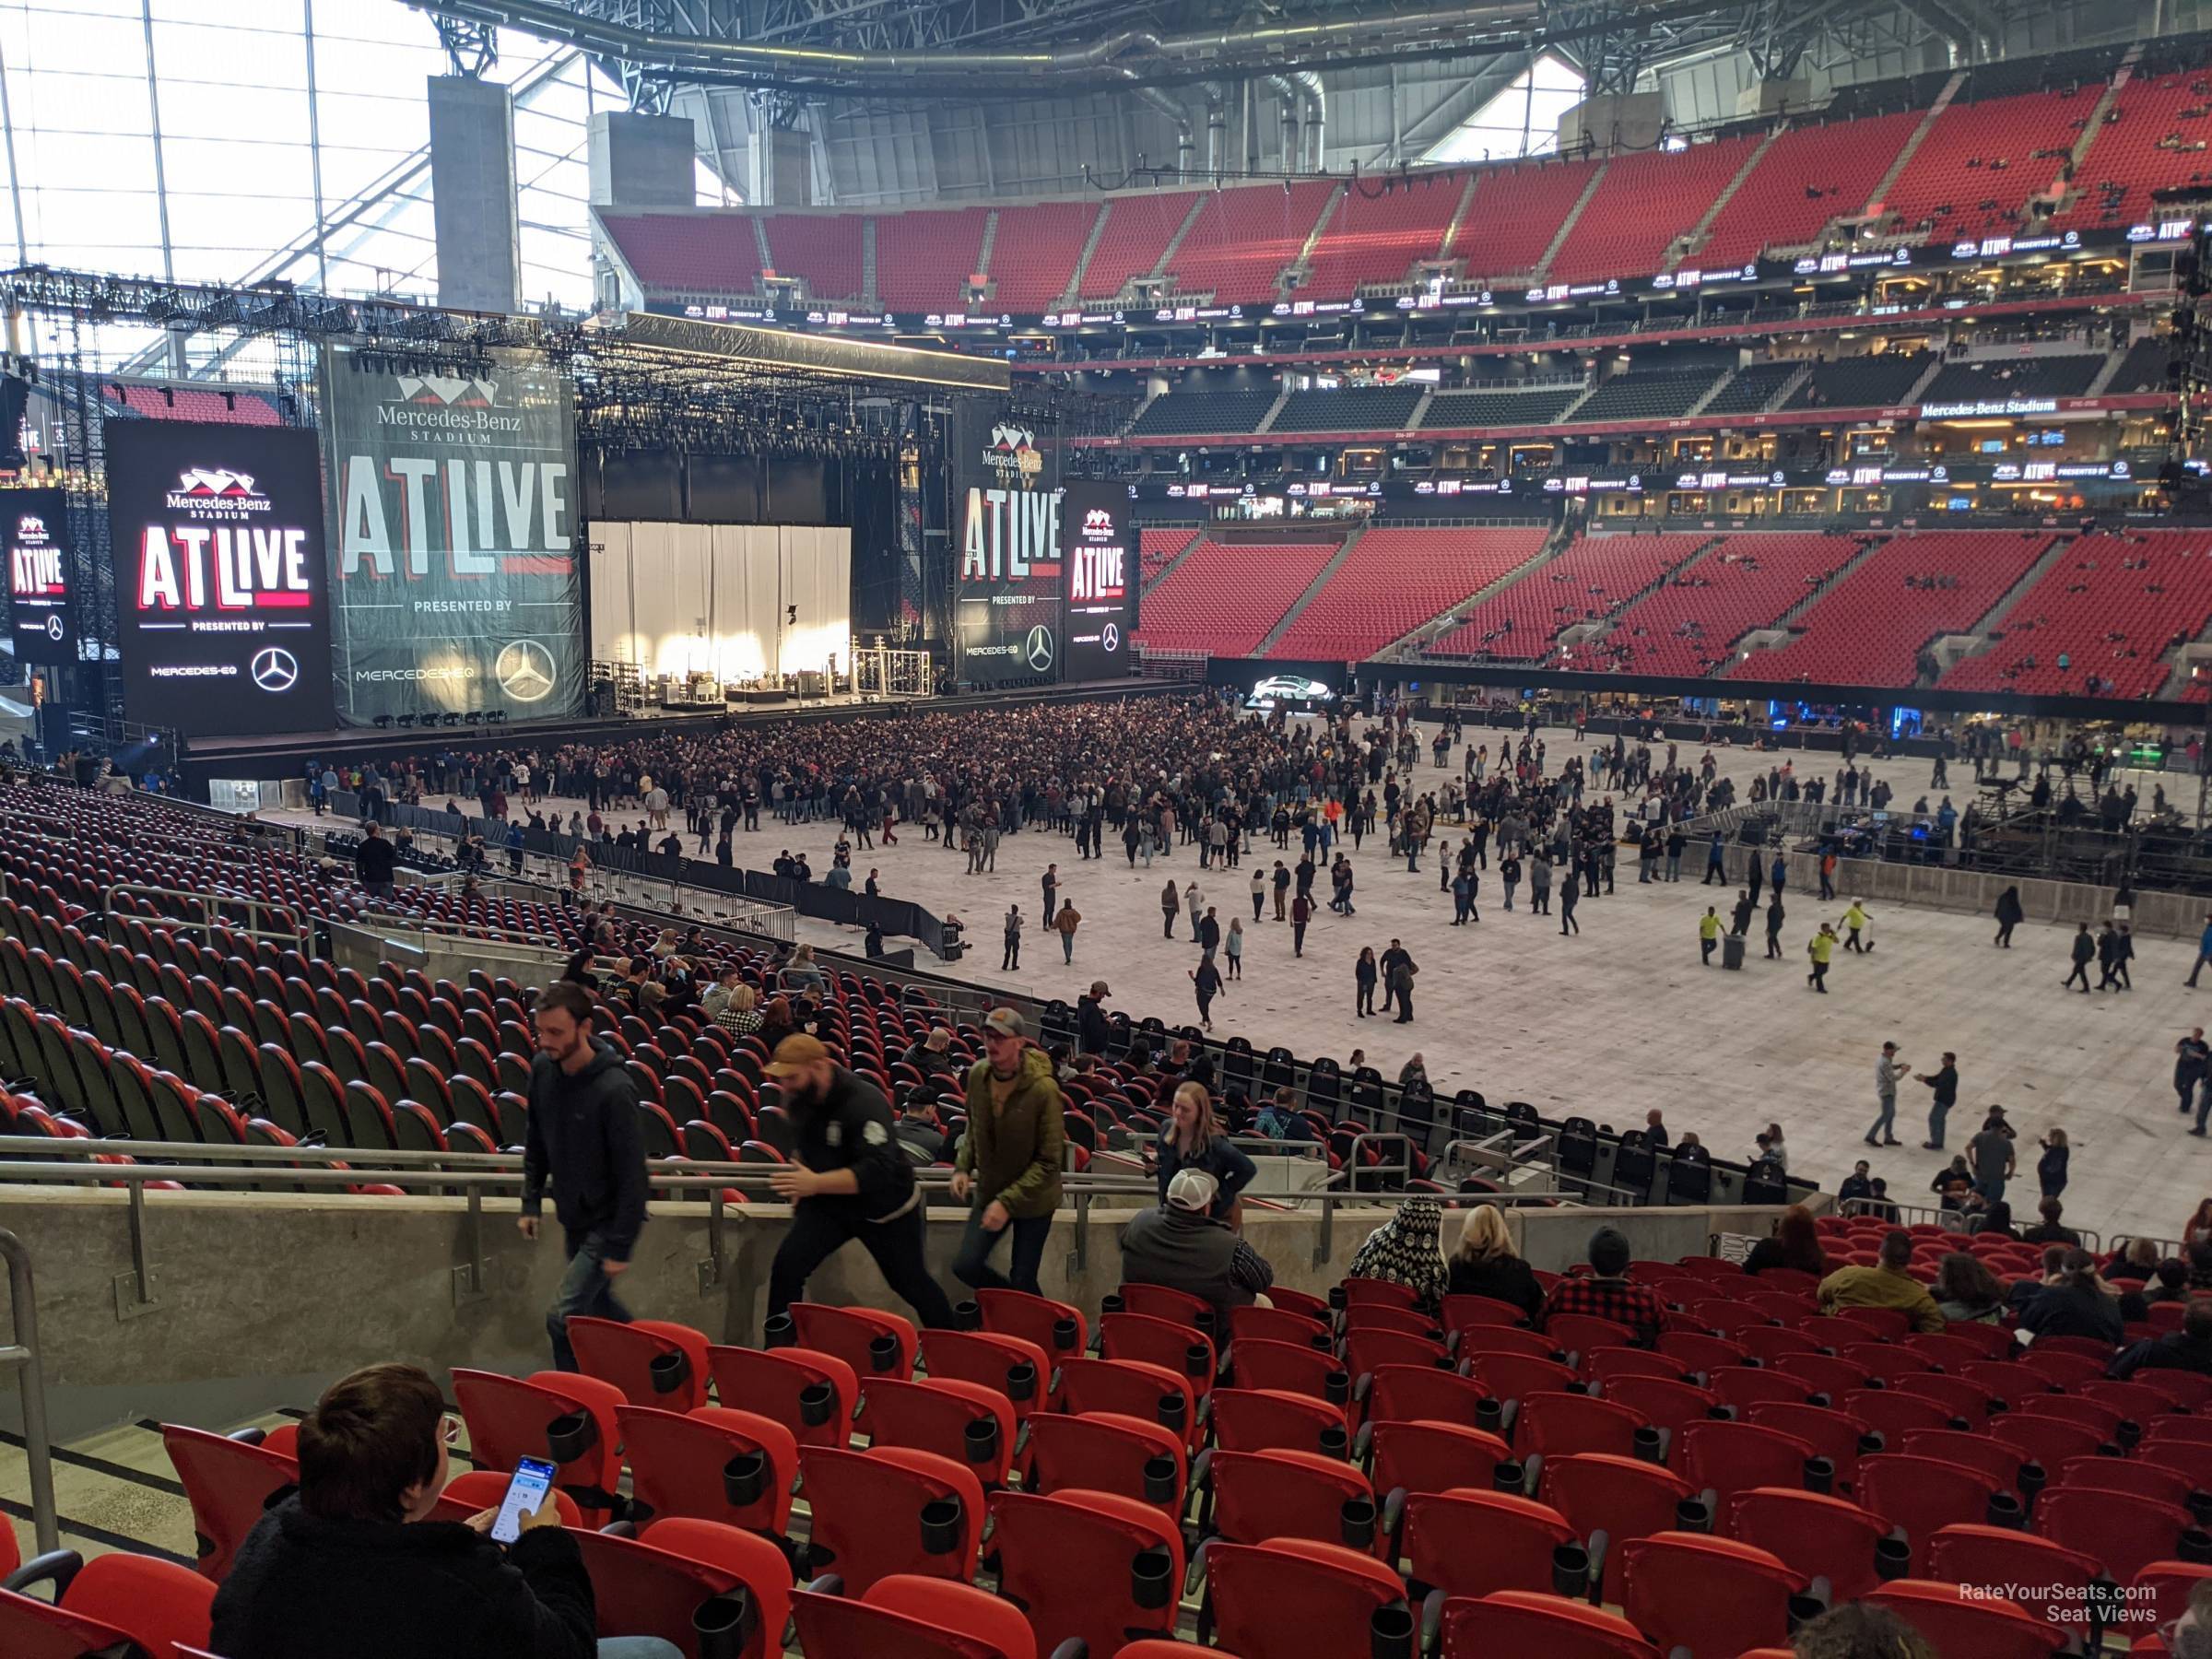 section 125, row 26 seat view  for concert - mercedes-benz stadium